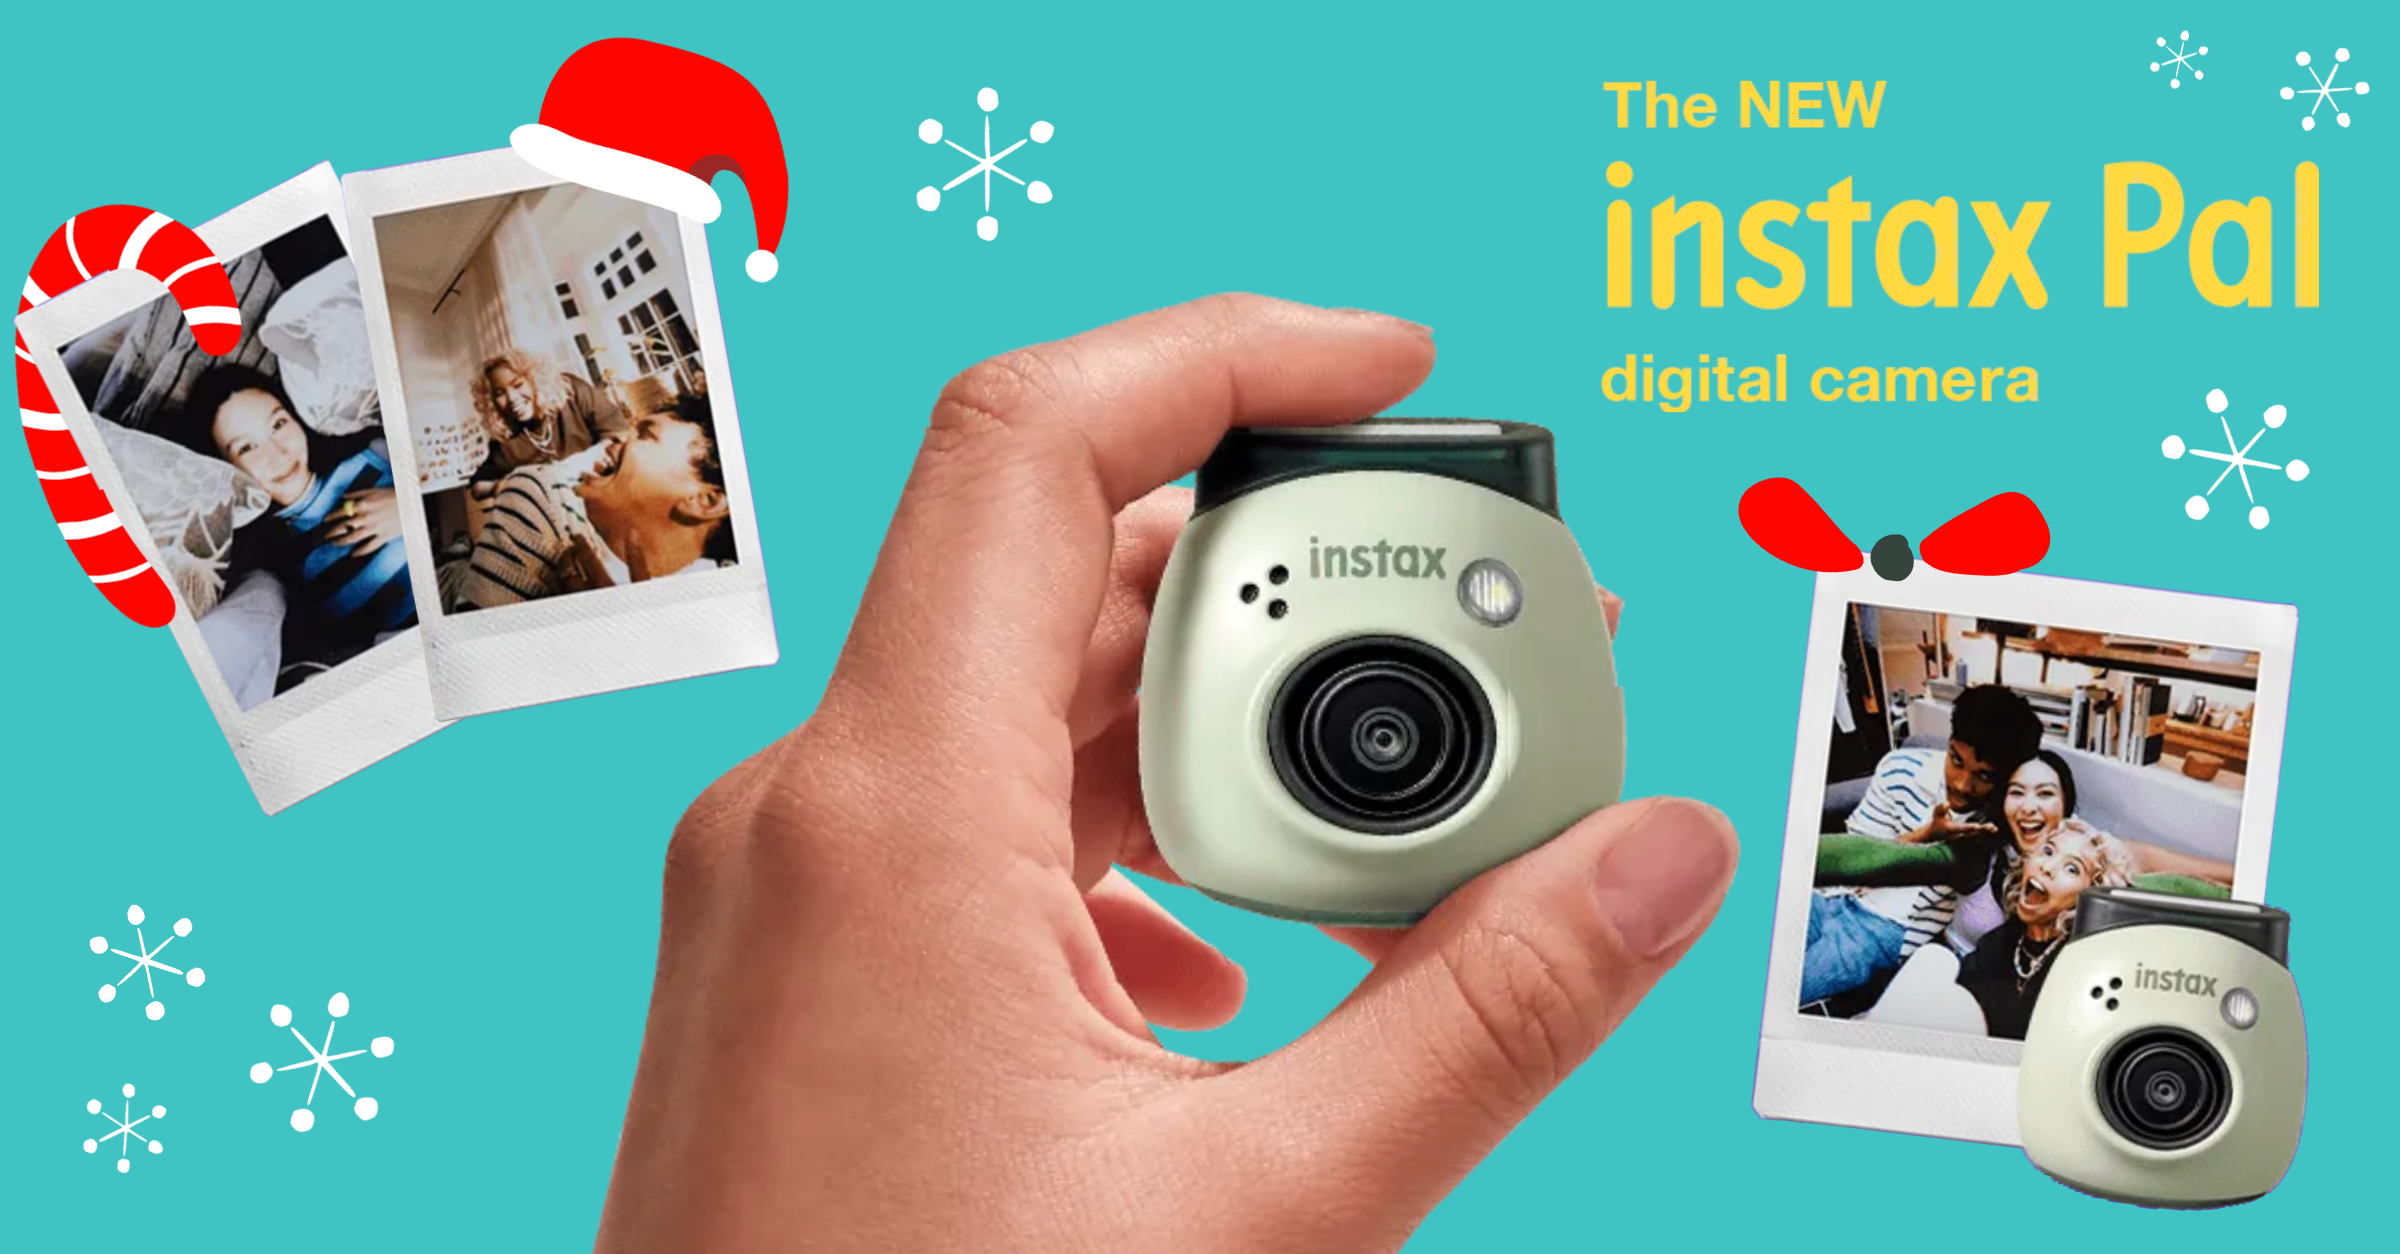 Fujifilm Instax Pal - The Smallest Big Gift You Can Give!